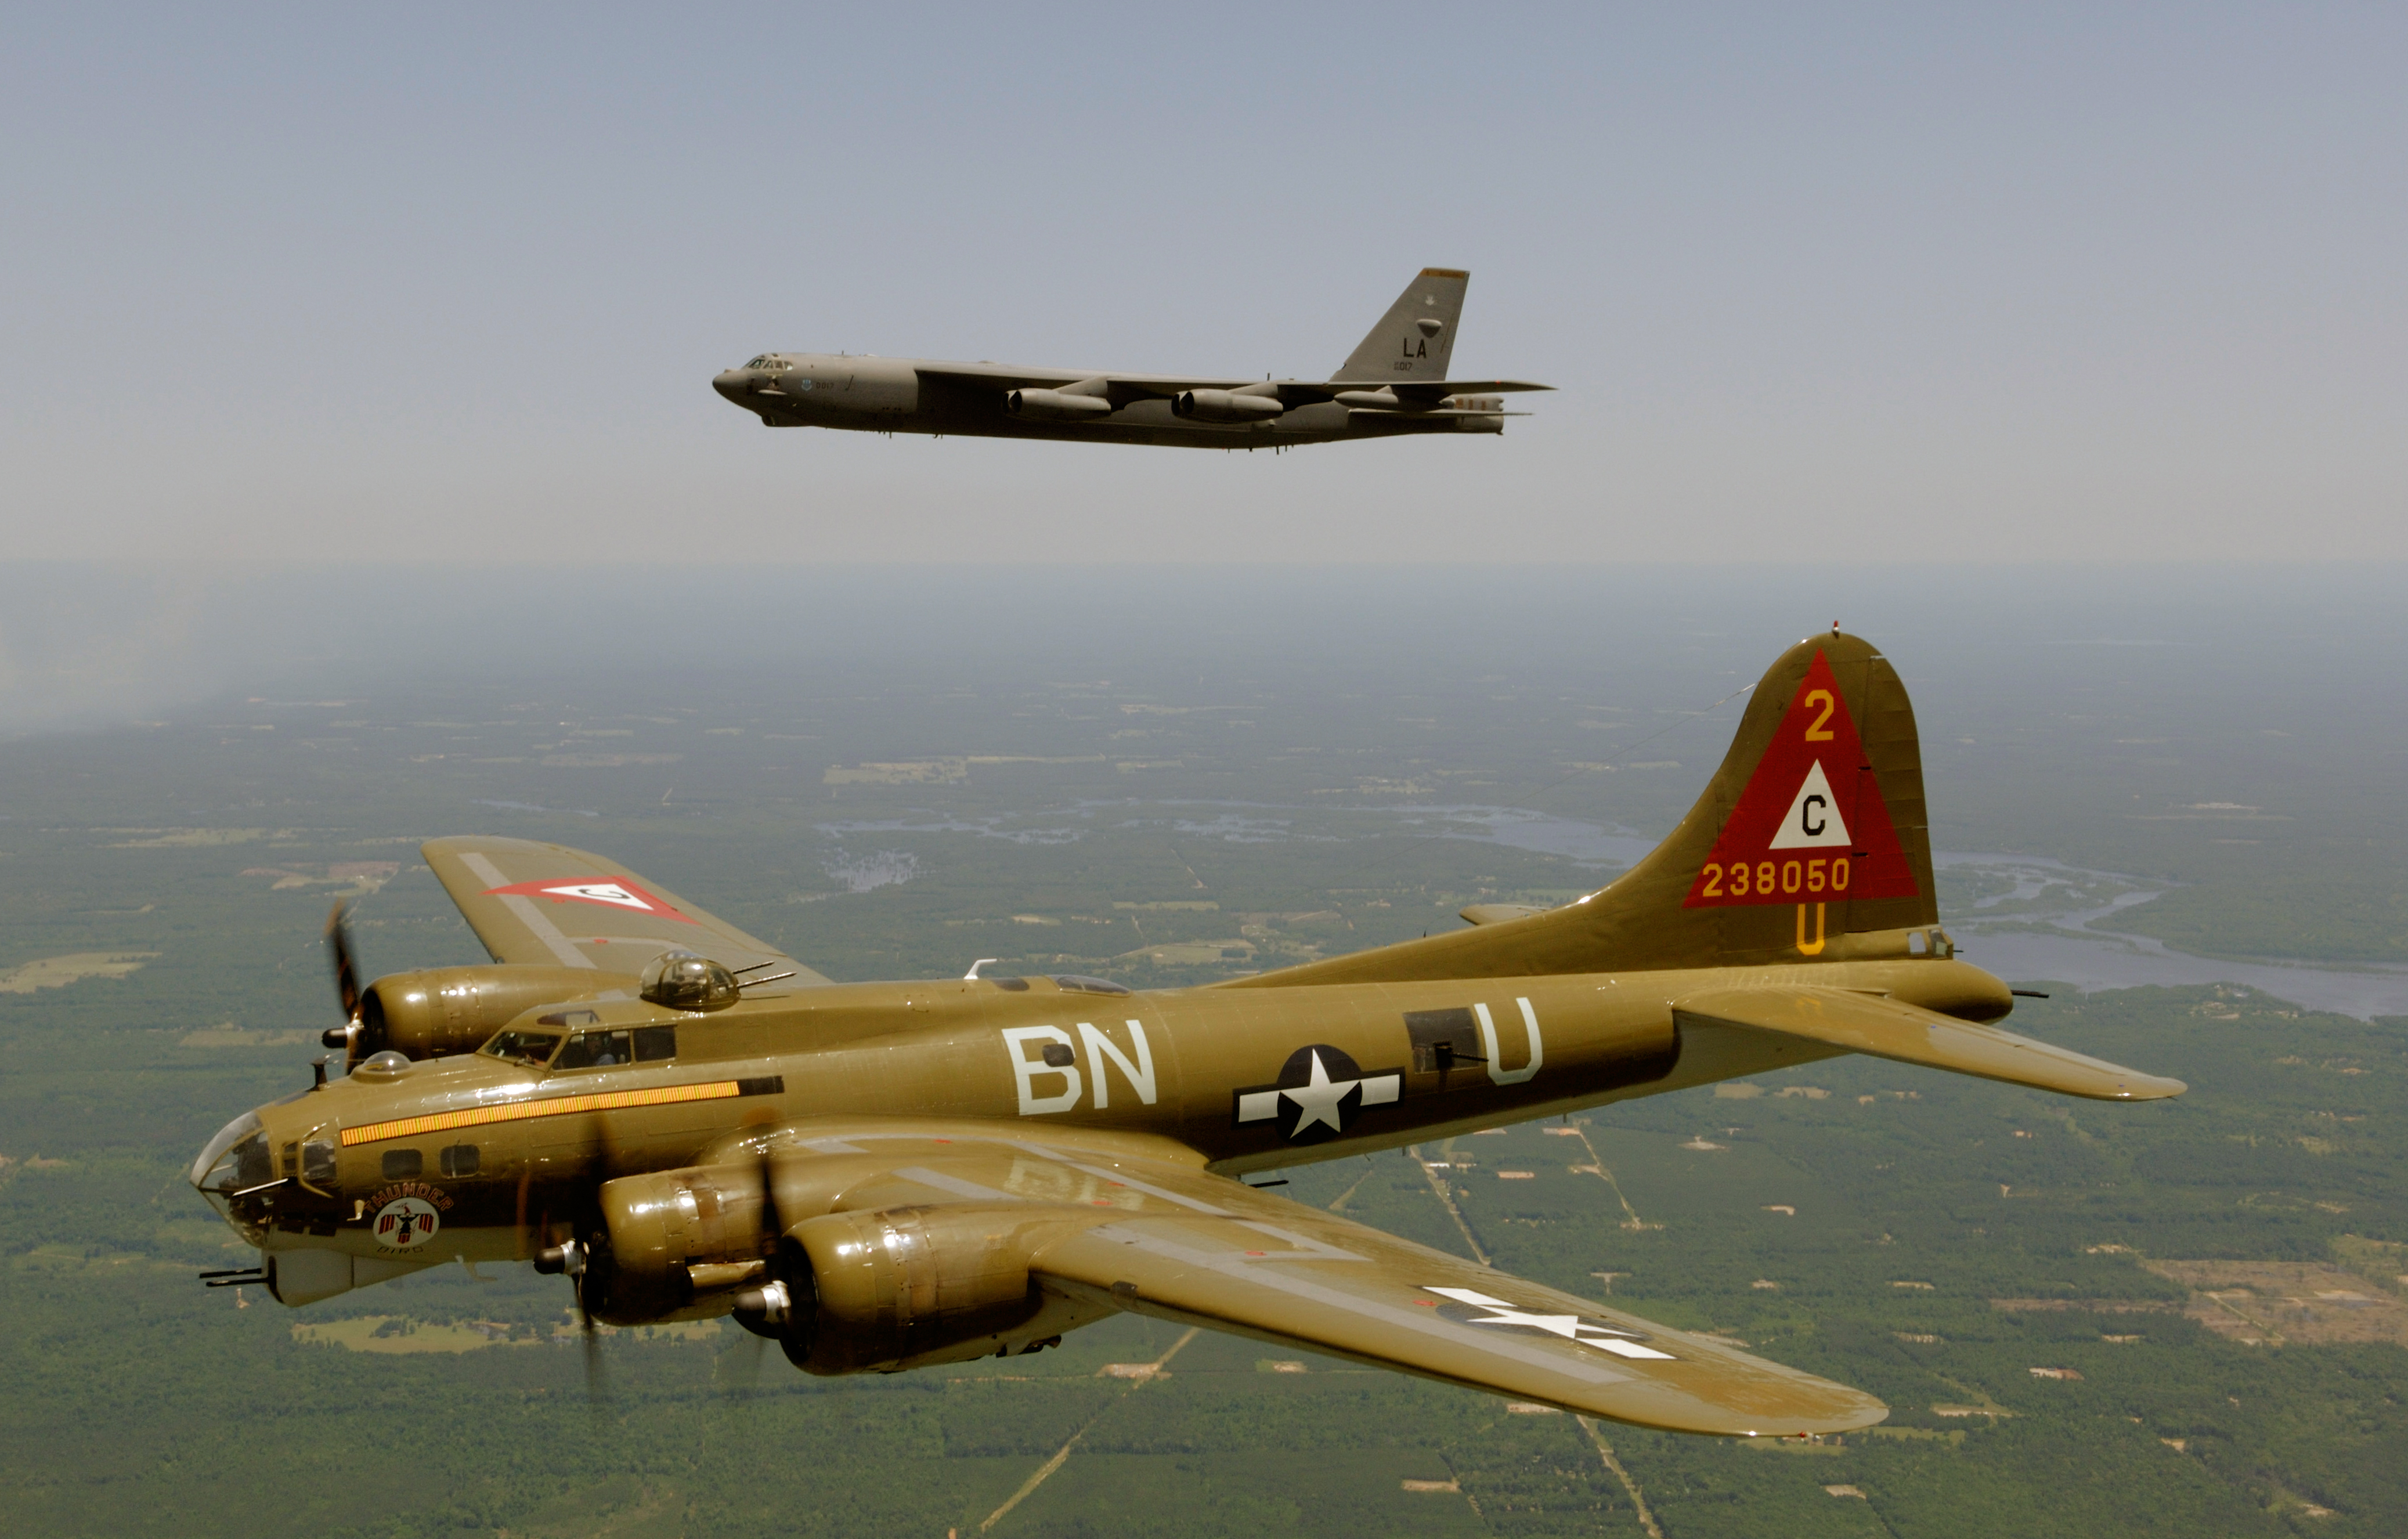 B-17 Formation by Master Sgt. Michael A. Kaplan